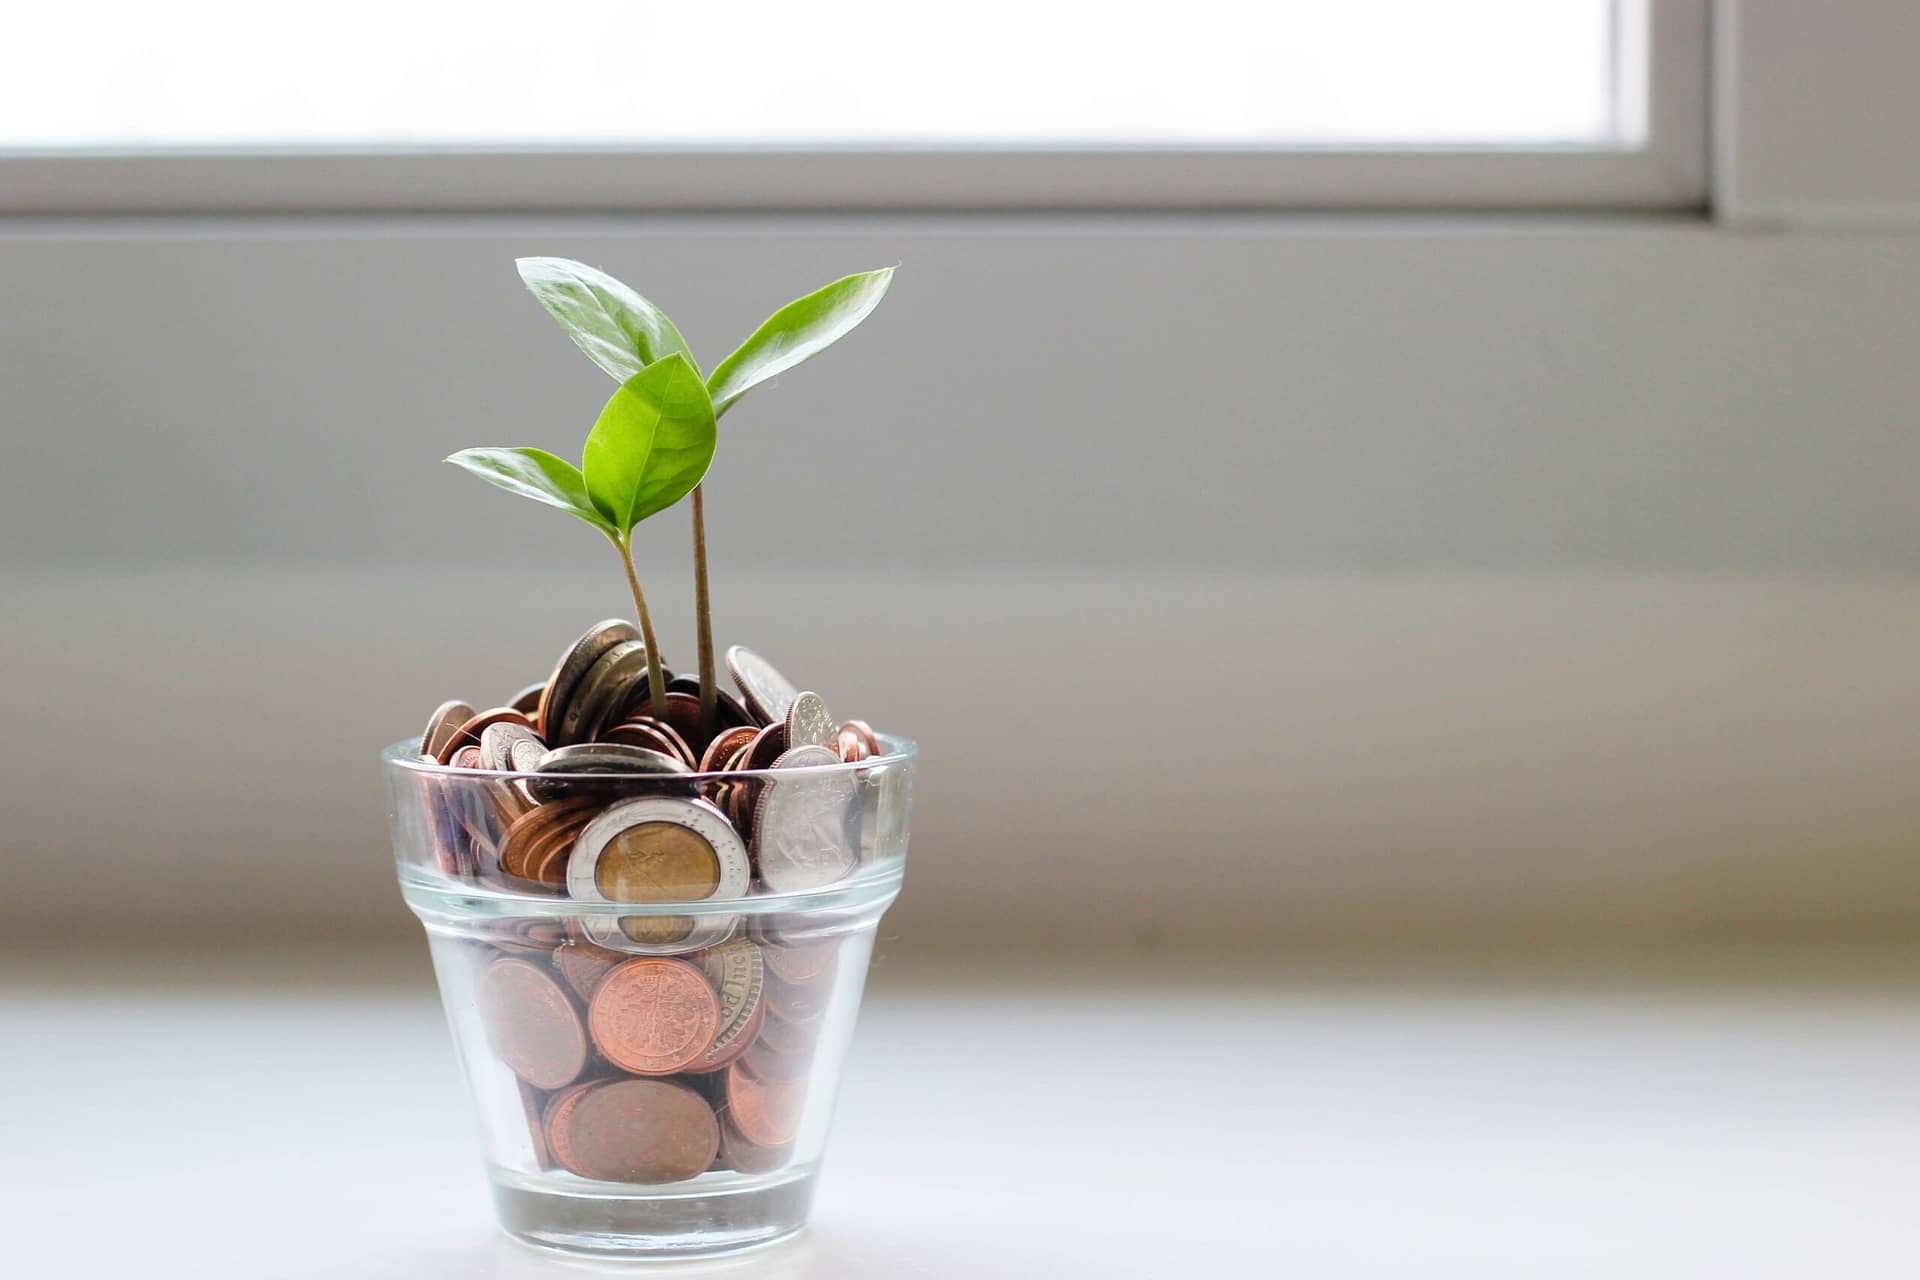 green plant growing from glass pot of coins